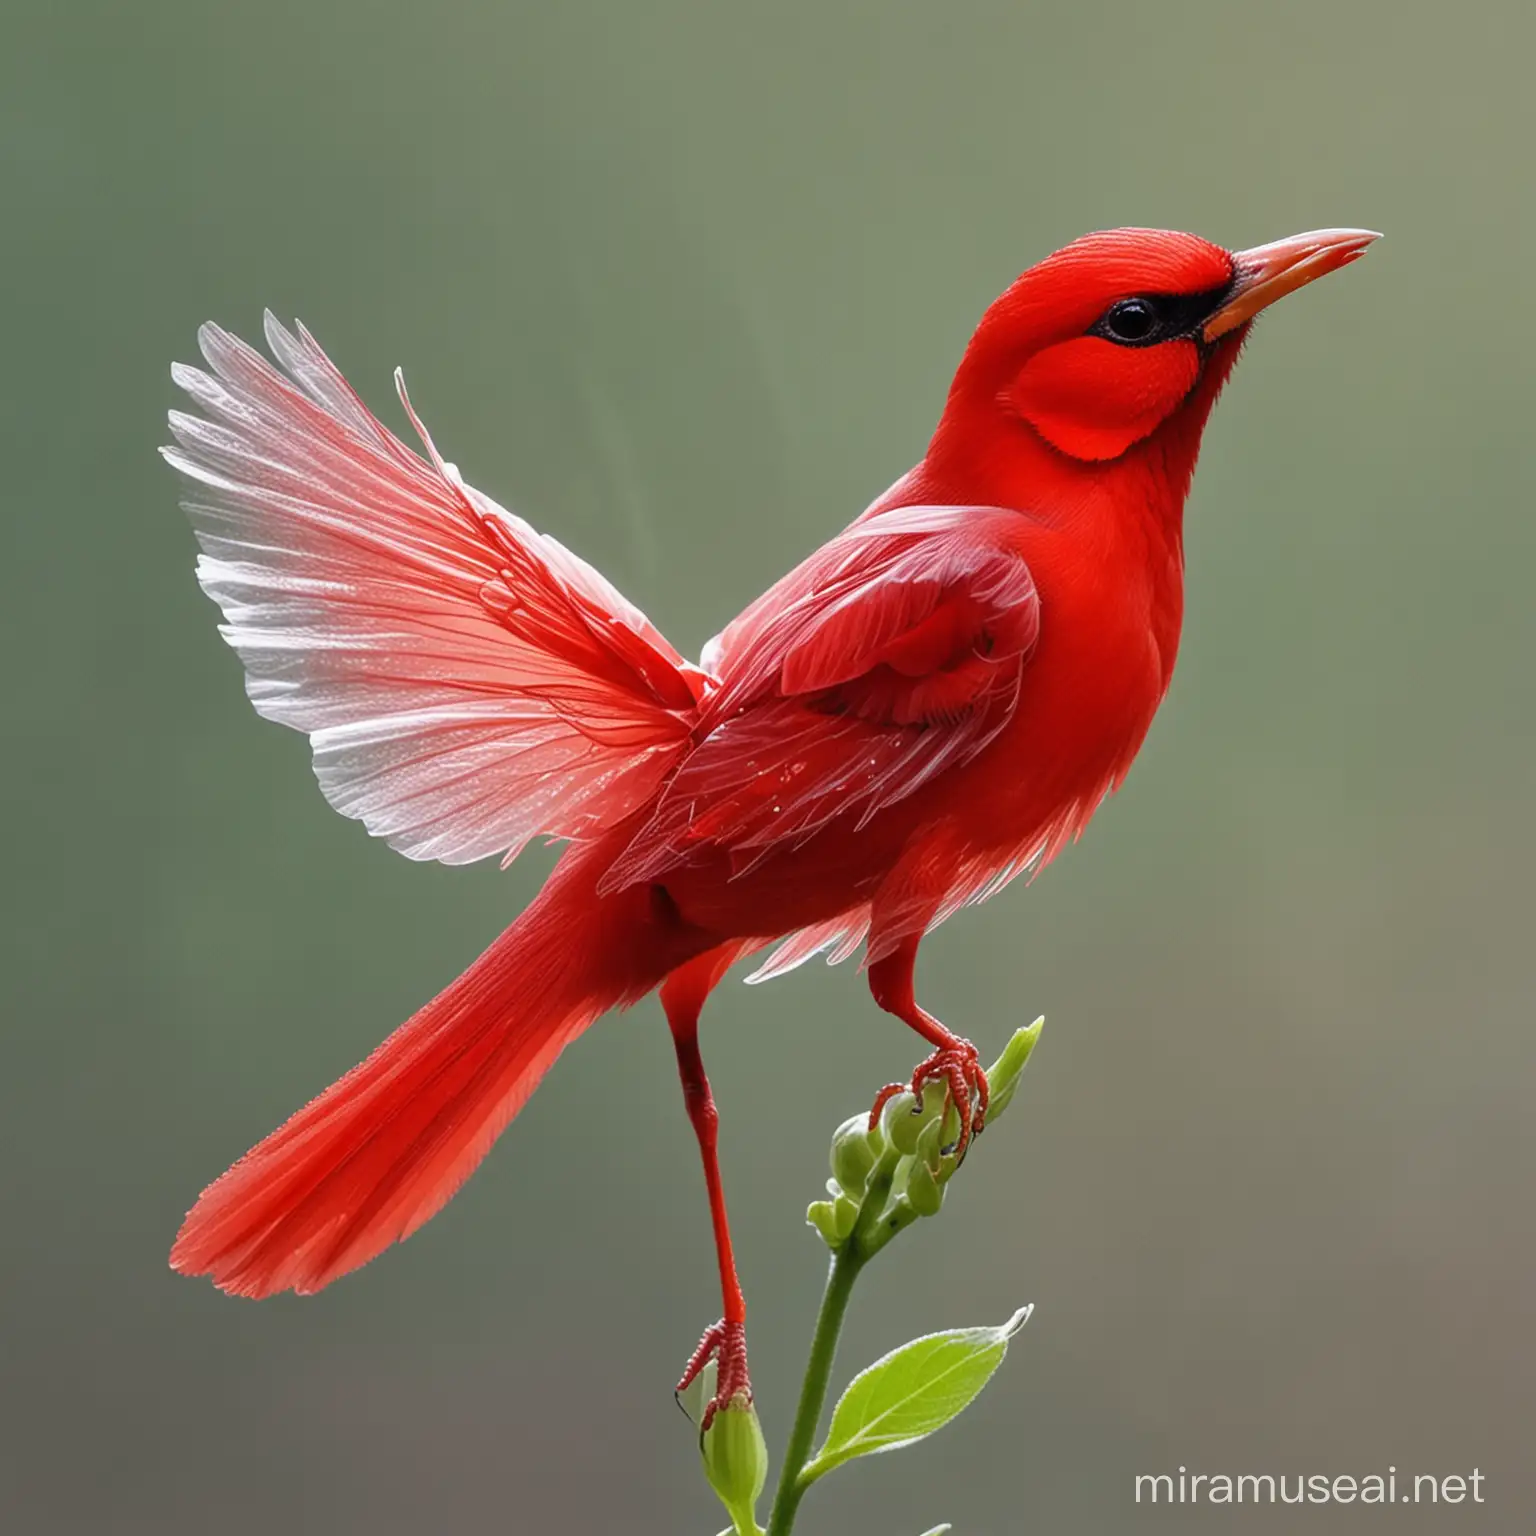 Transparent pure red flower that looks like bird 